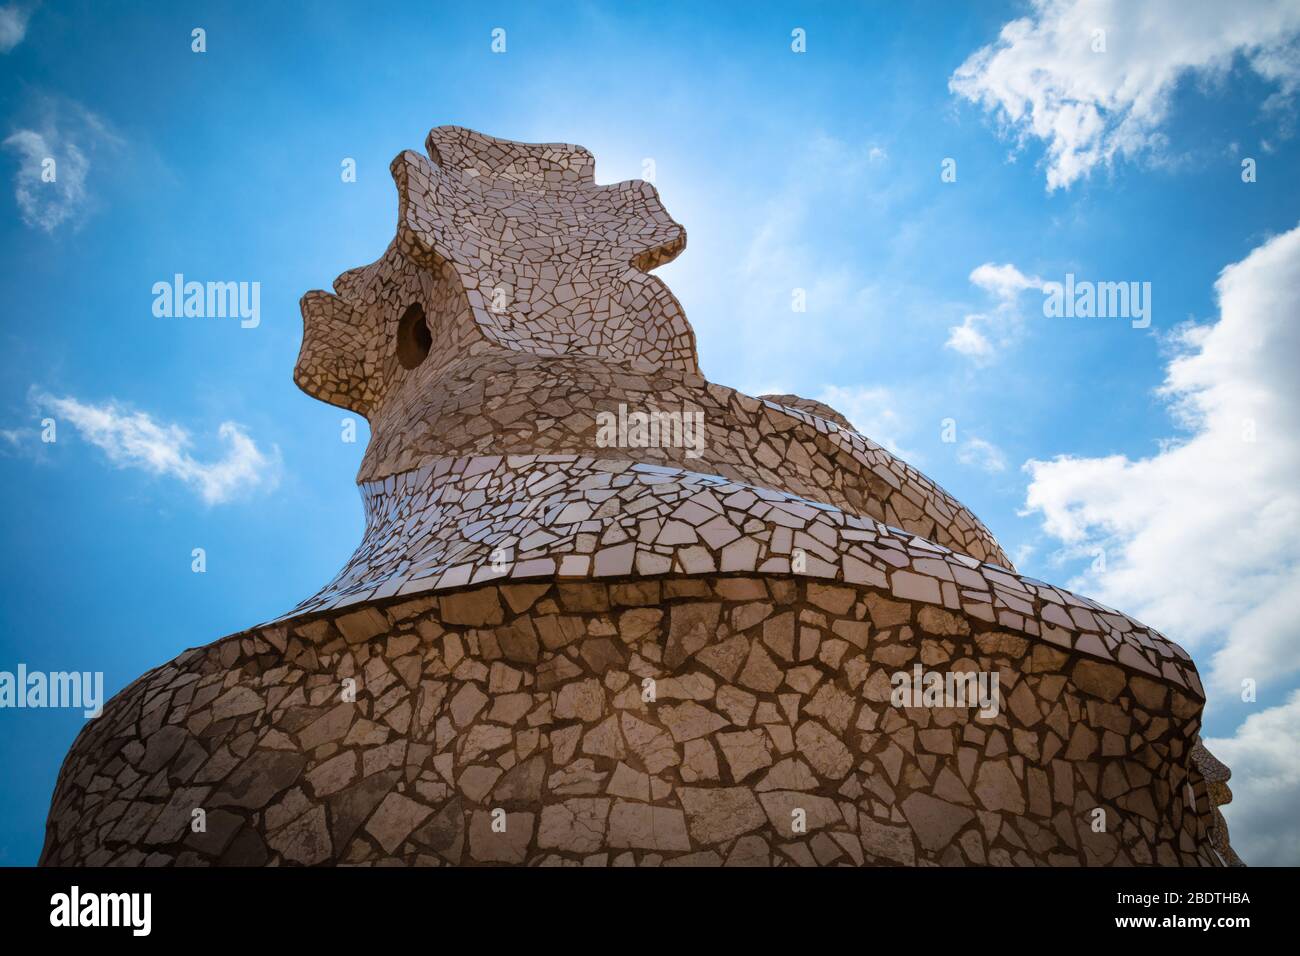 Skylights/staircase exit on the roof of Casa Mila, Barcelona, Spain. Stock Photo